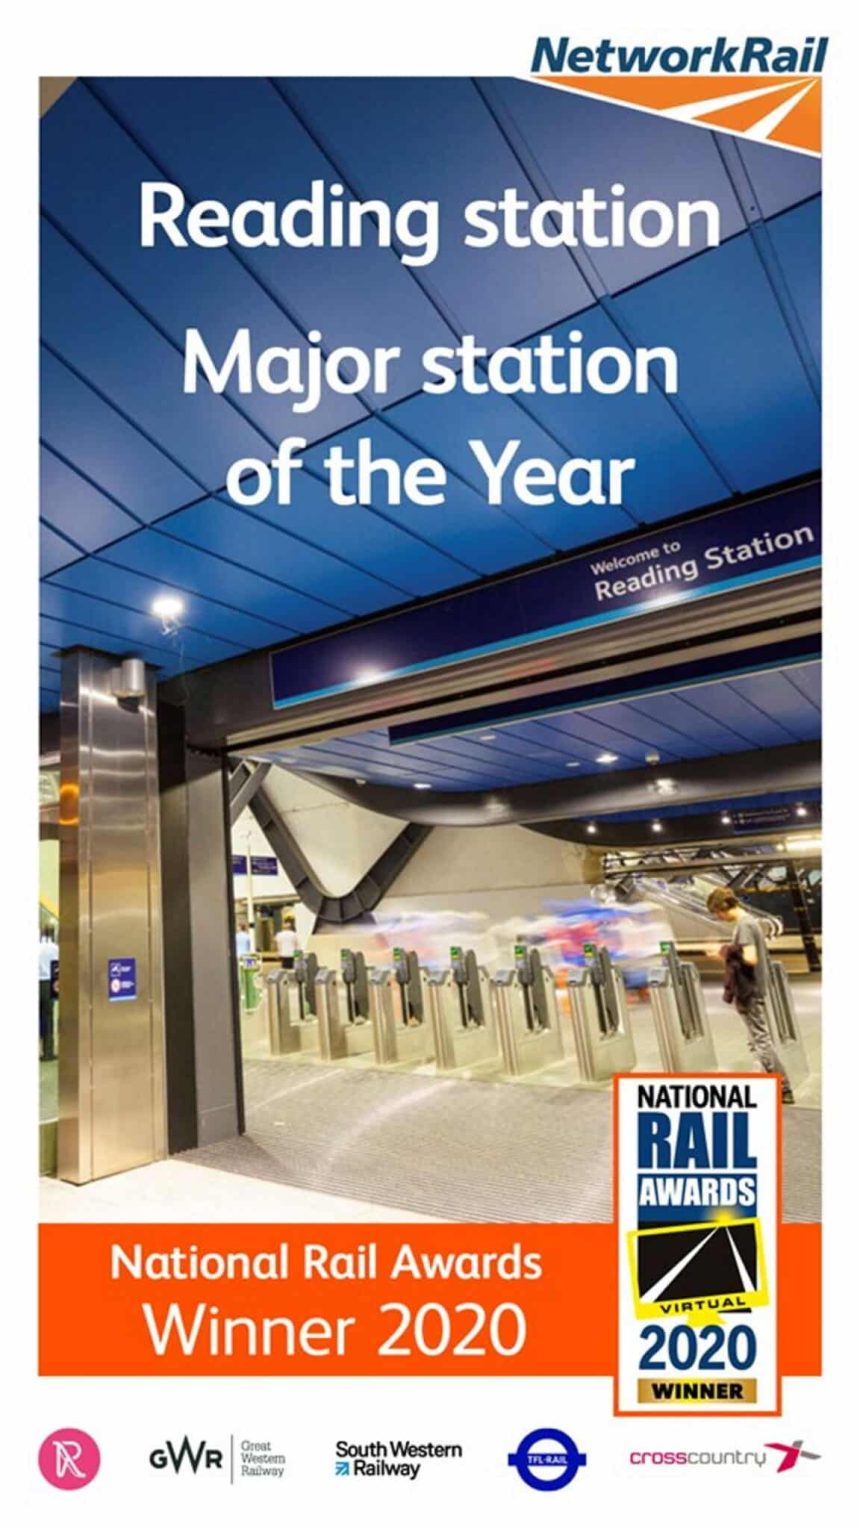 Reading station awarded major station of the year